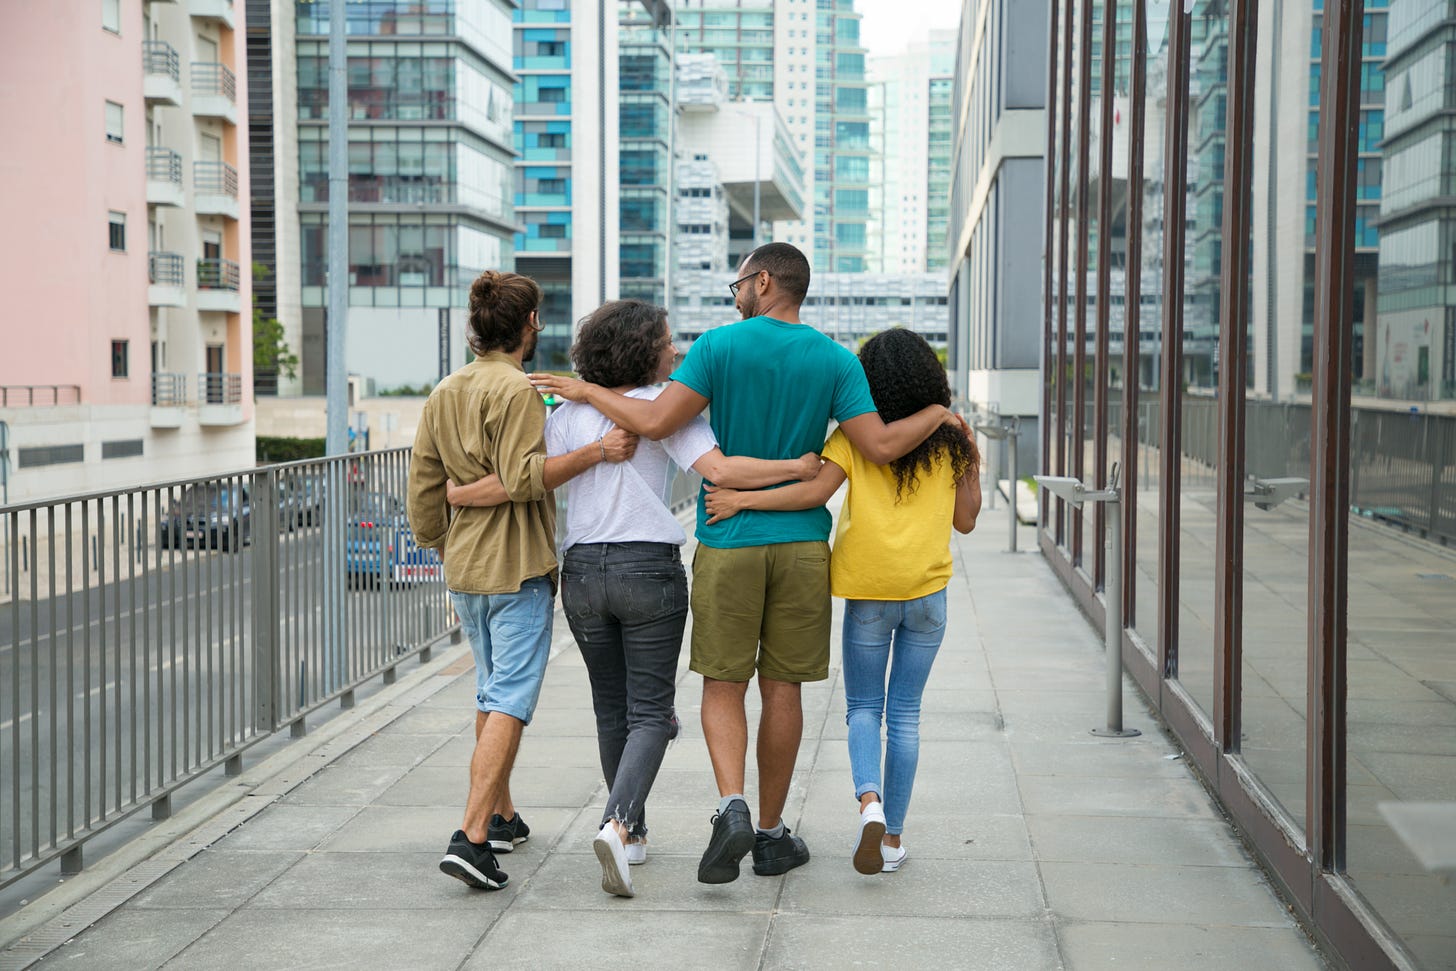 A group of four people are walking down the sidewalk in a big city scene. You can only see them from the back, and they all have their arms around each other. Looks like a guy with a pony tail, then a lady with a white blouse and short hair, then a tall guy with a teal shirt and glasses, and finally a girl with long black hair and a yellow shirt. They look polyamorous as fuck which is why I chose this image